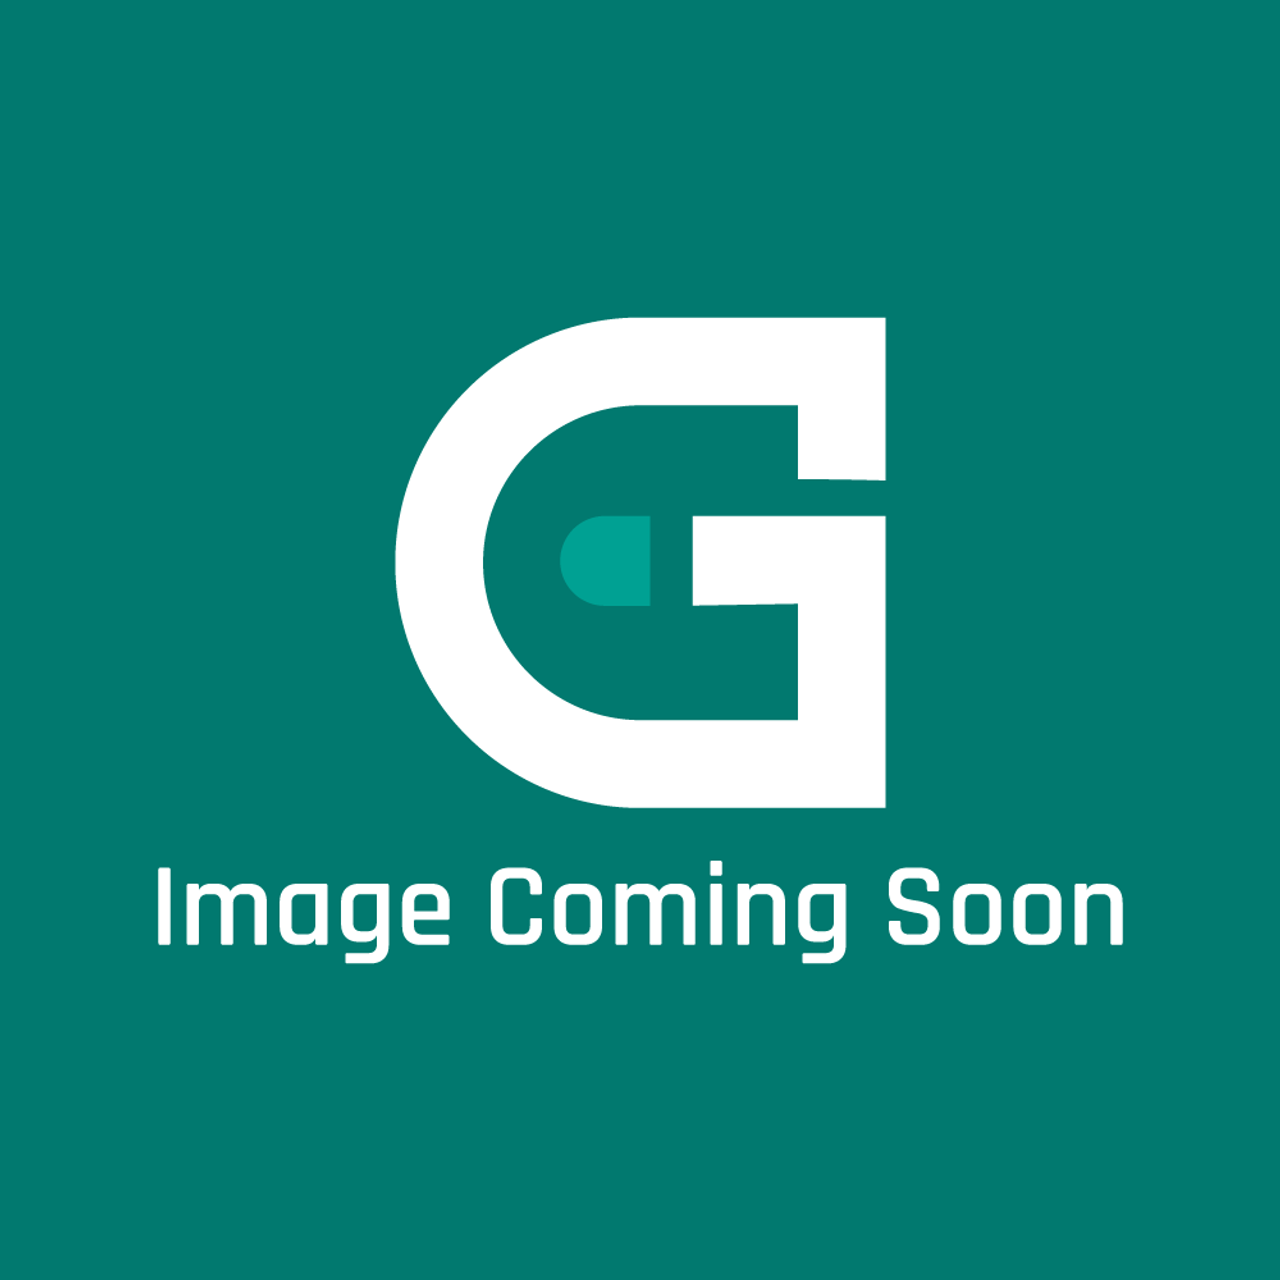 Frigidaire - Electrolux 5304500339 Grate - Image Coming Soon!